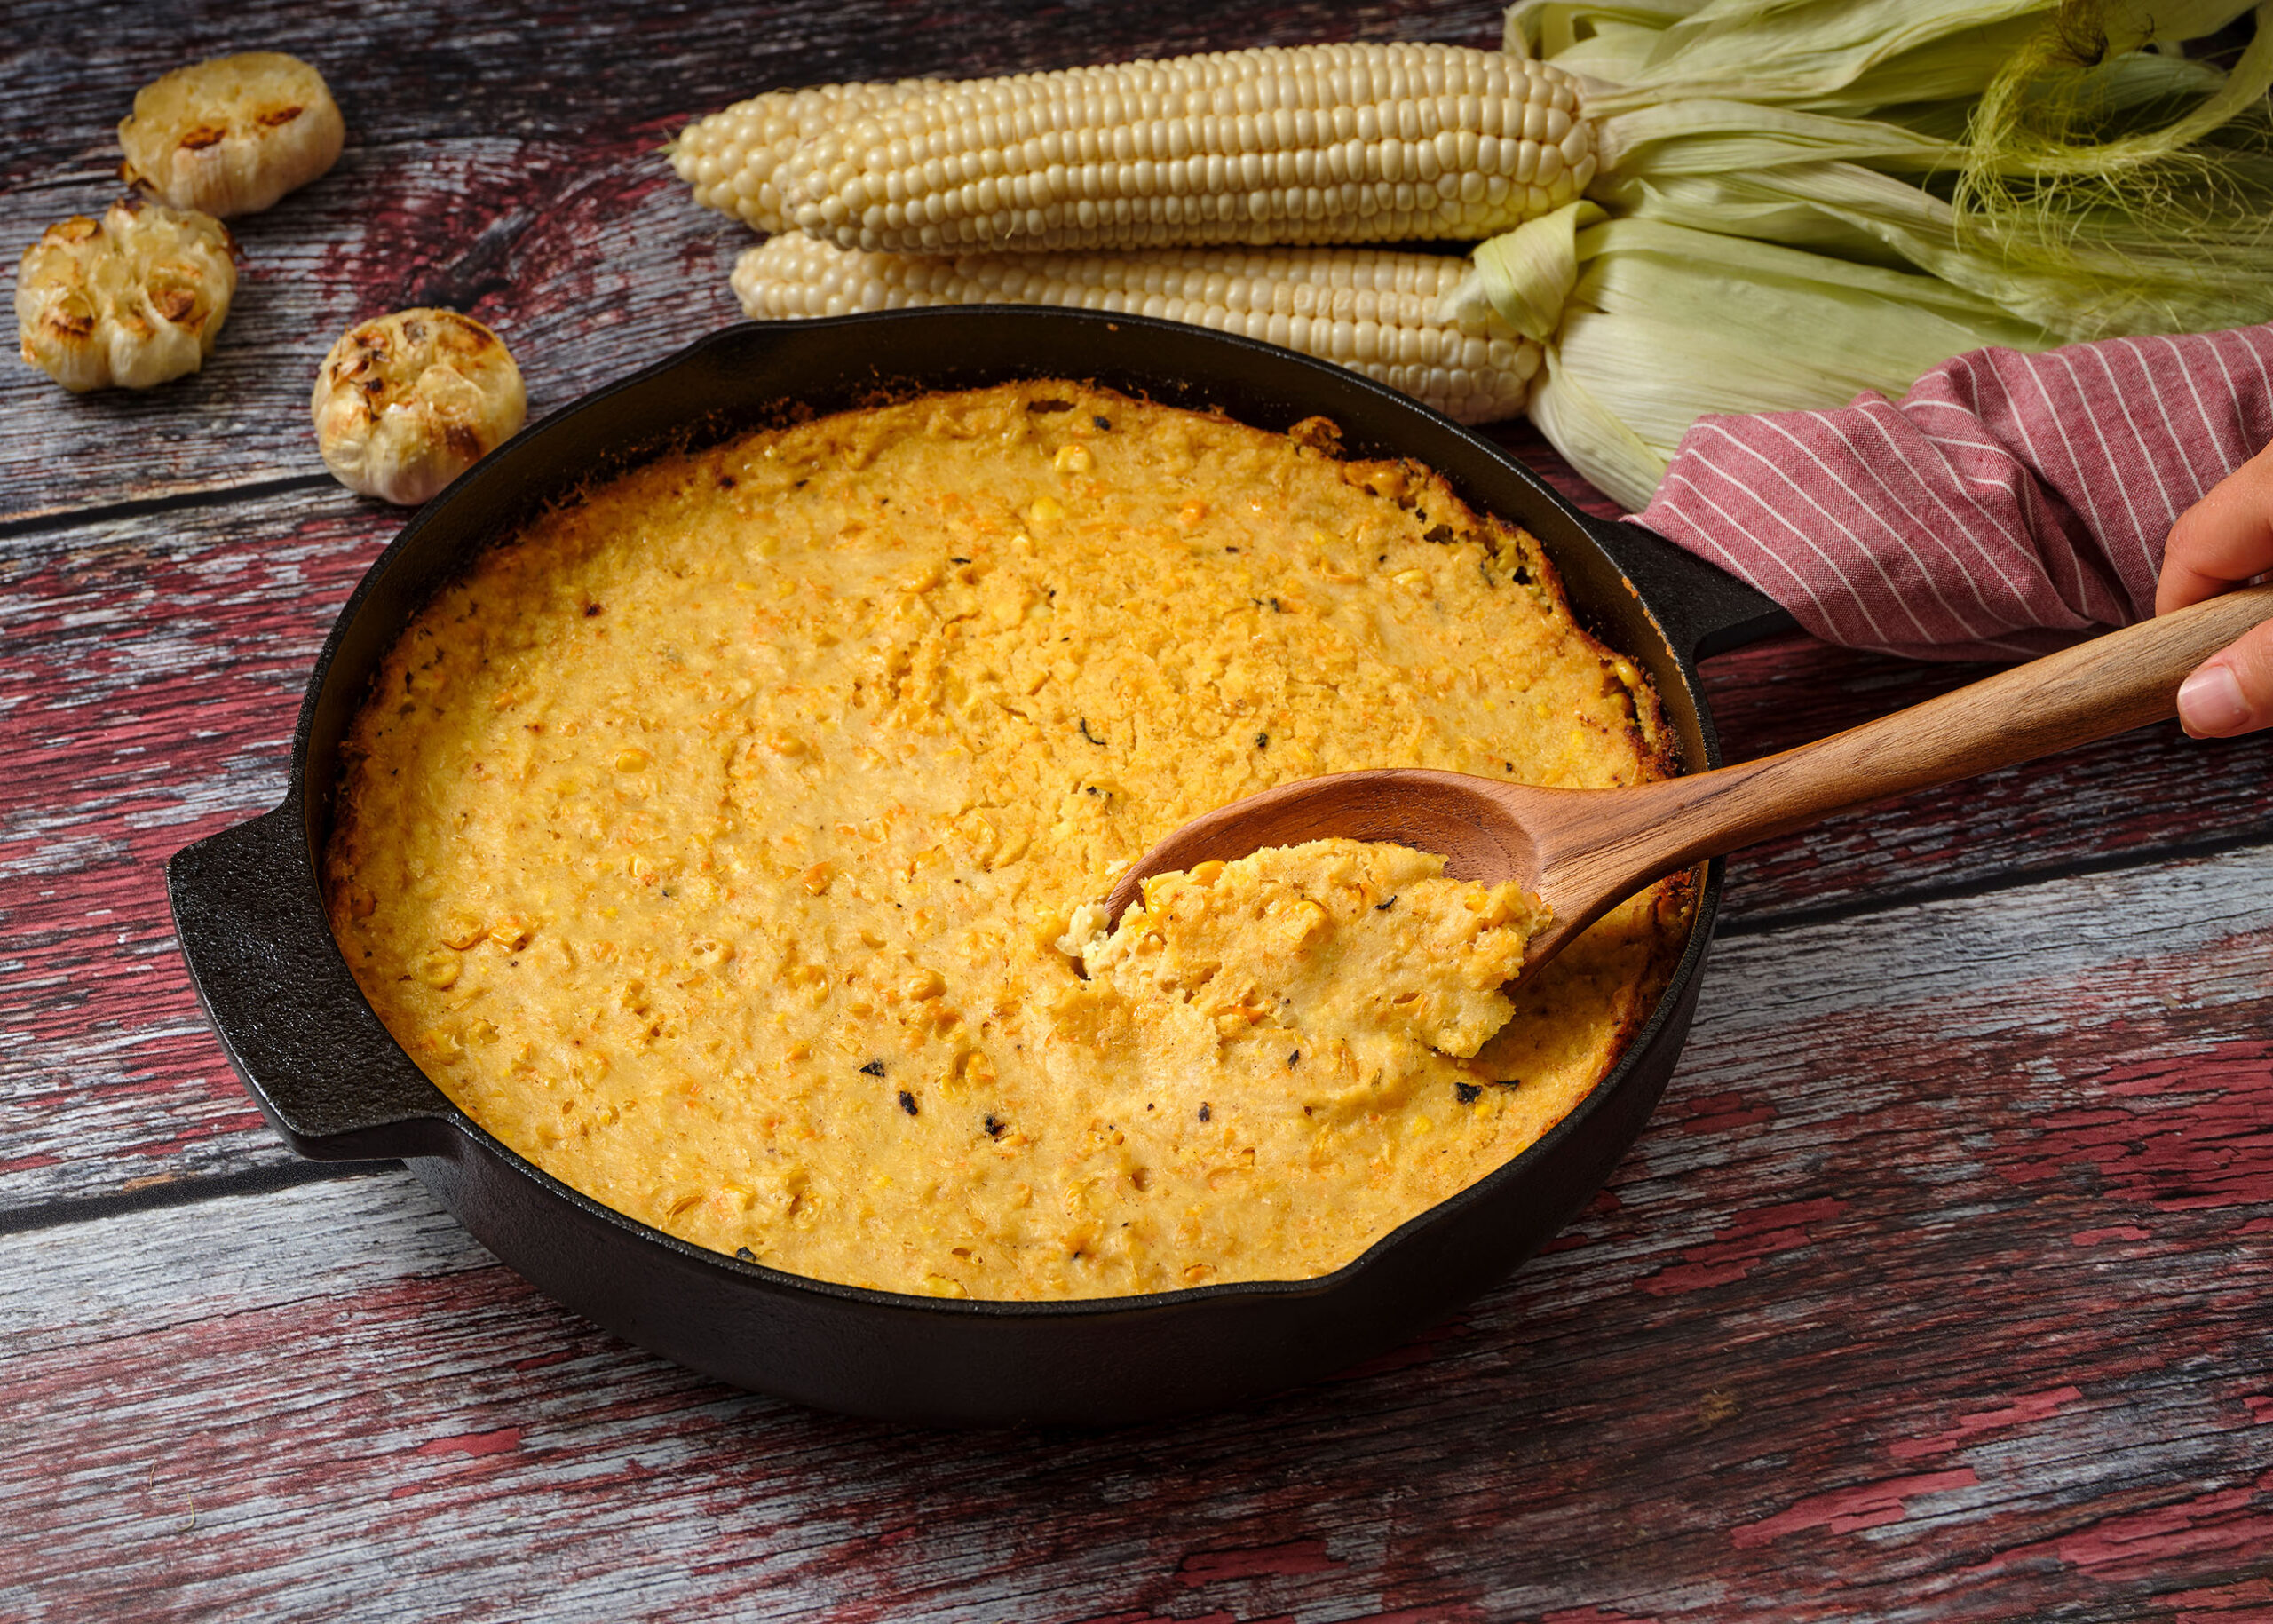 Skillet Corn Tamal with Duck Fat and Roasted Garlic